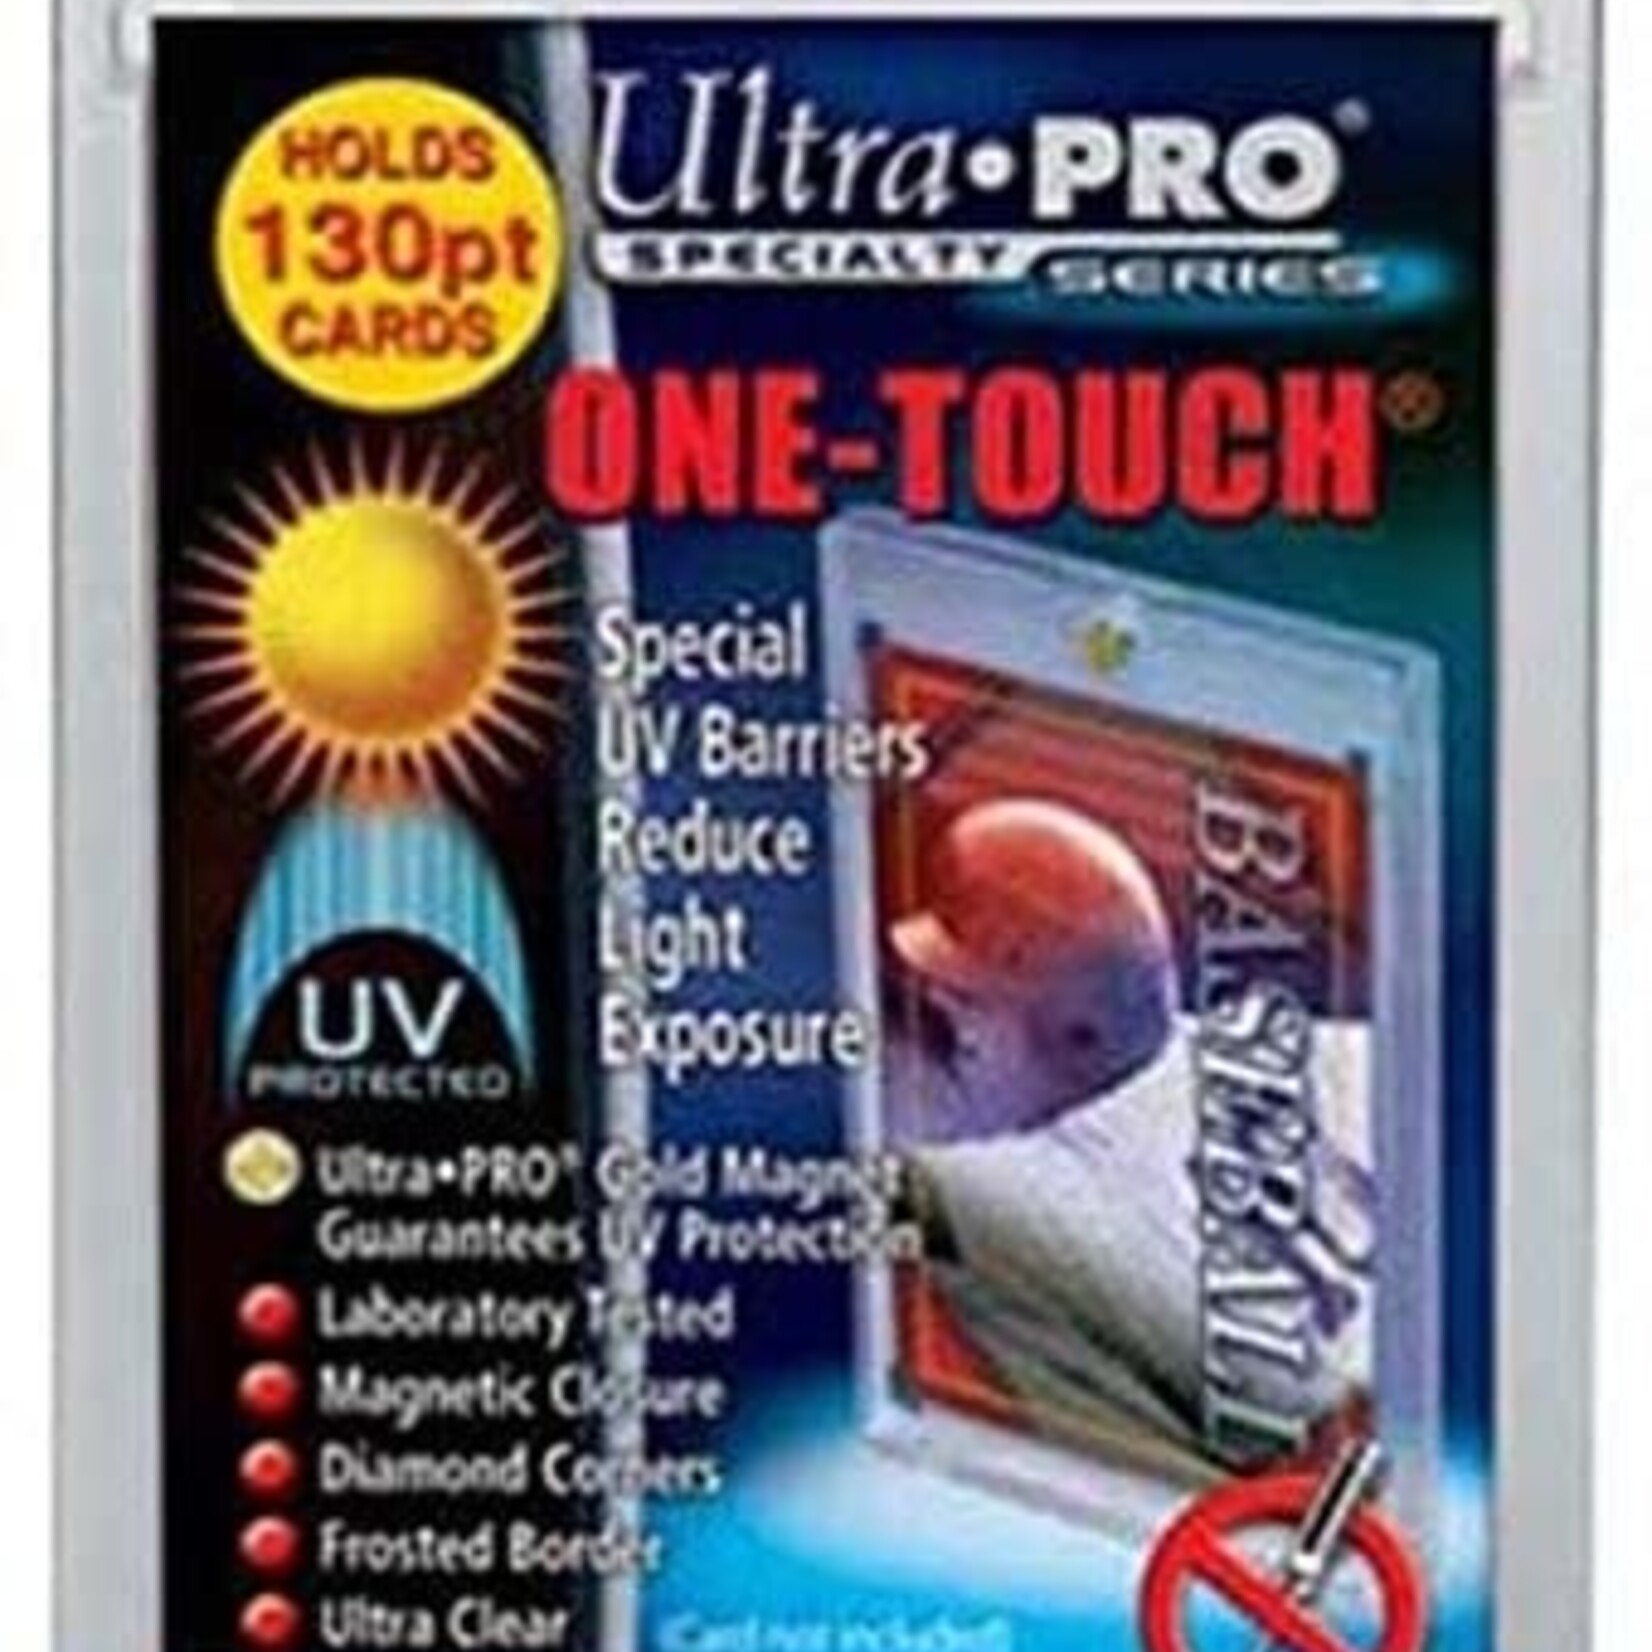 Ultra Pro Ultra Pro 130pt One Touch